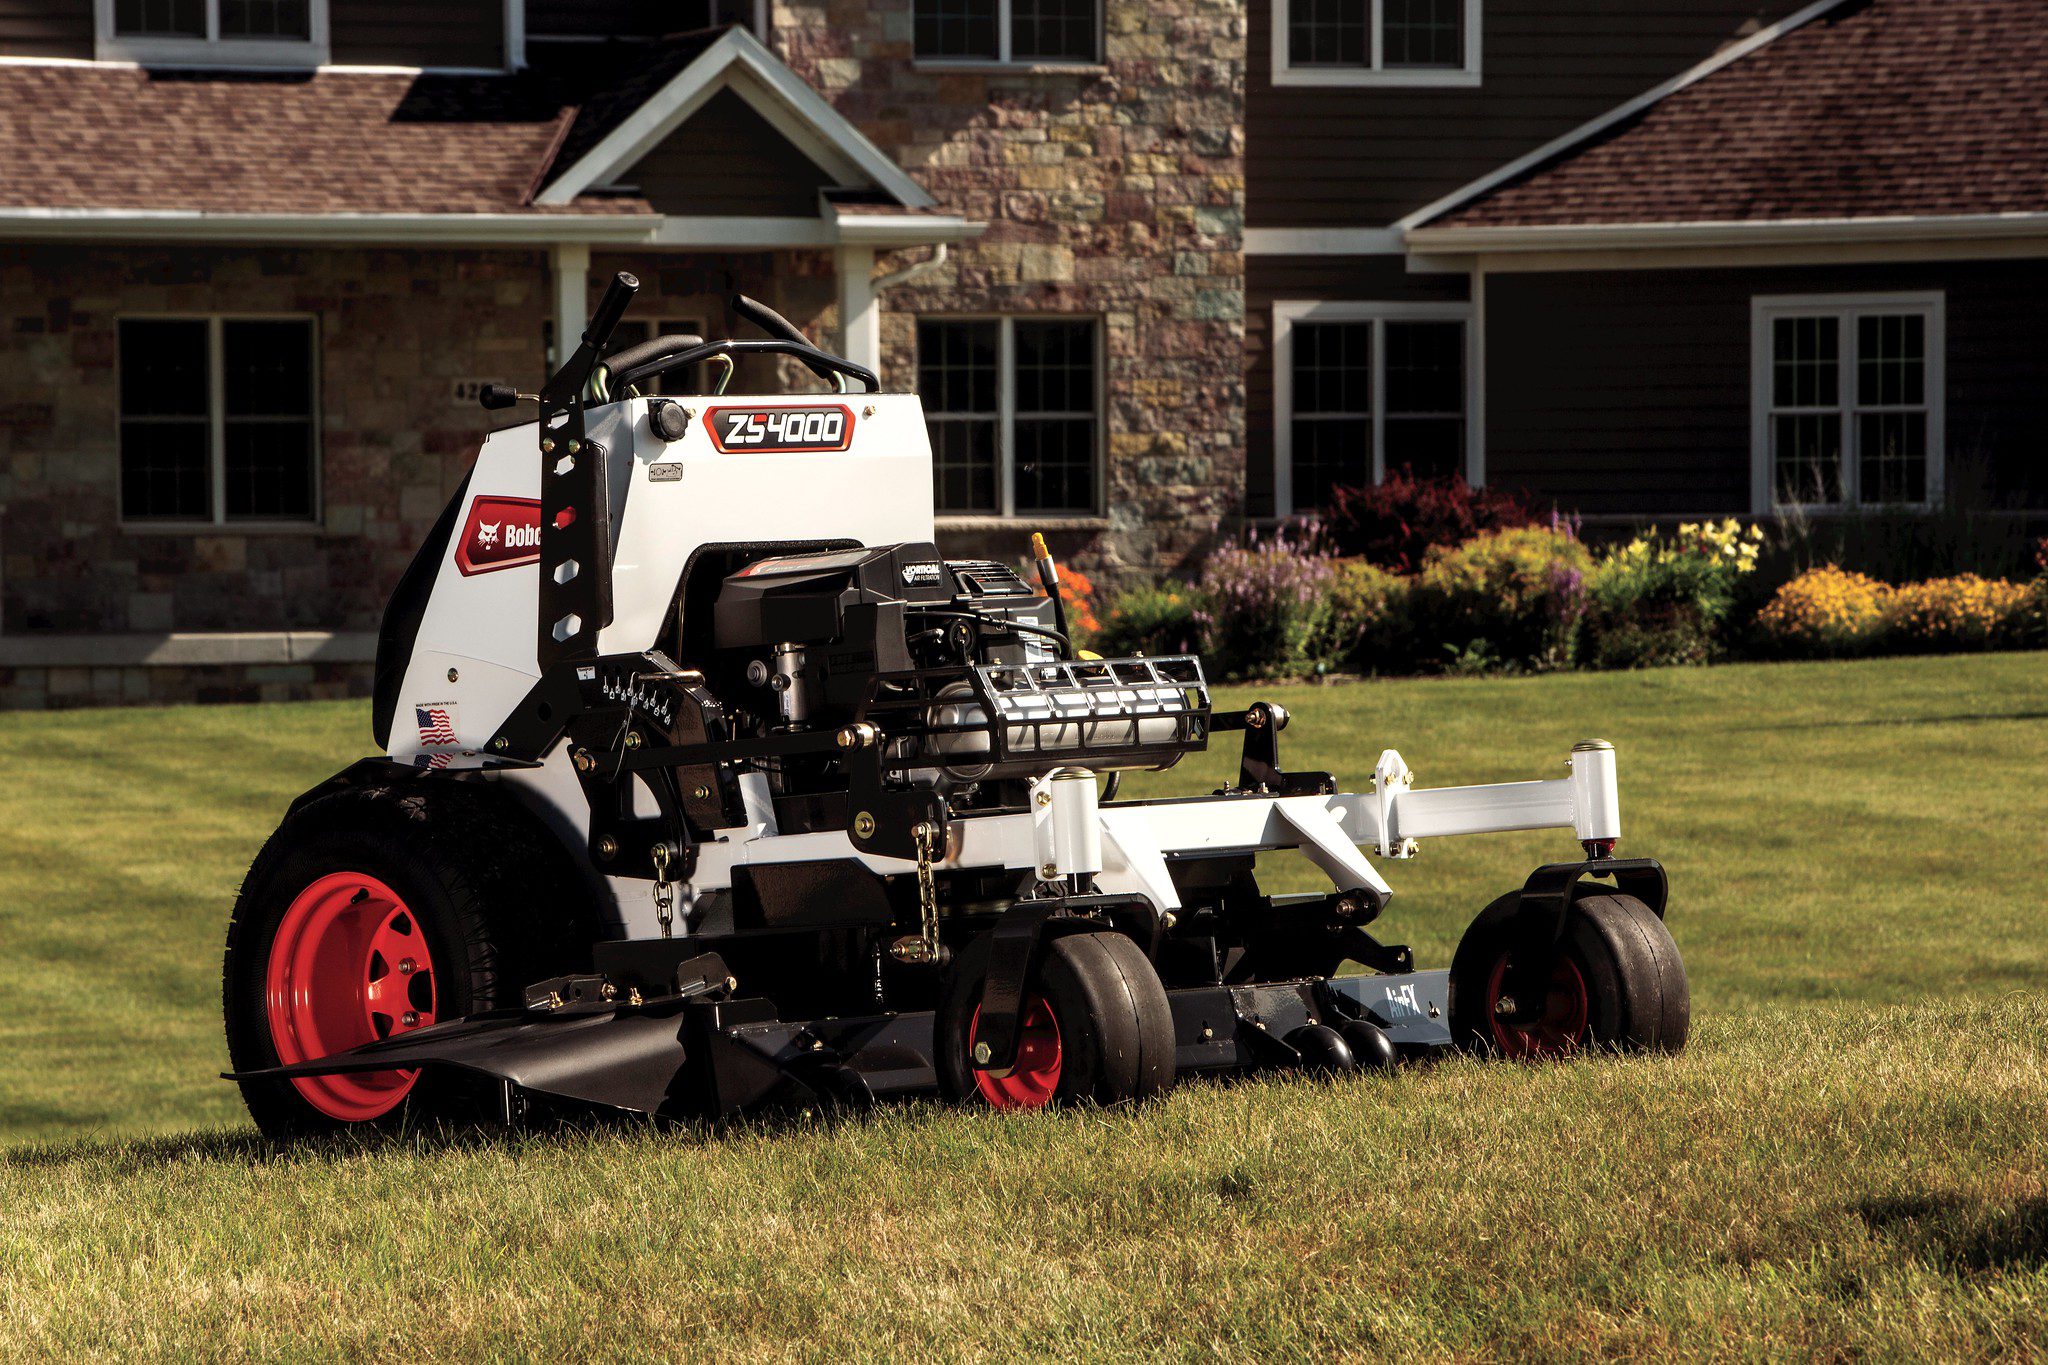 Browse Specs and more for the Stand-On Bobcat ZS4000 Mower 36″ - Bobcat of North Texas